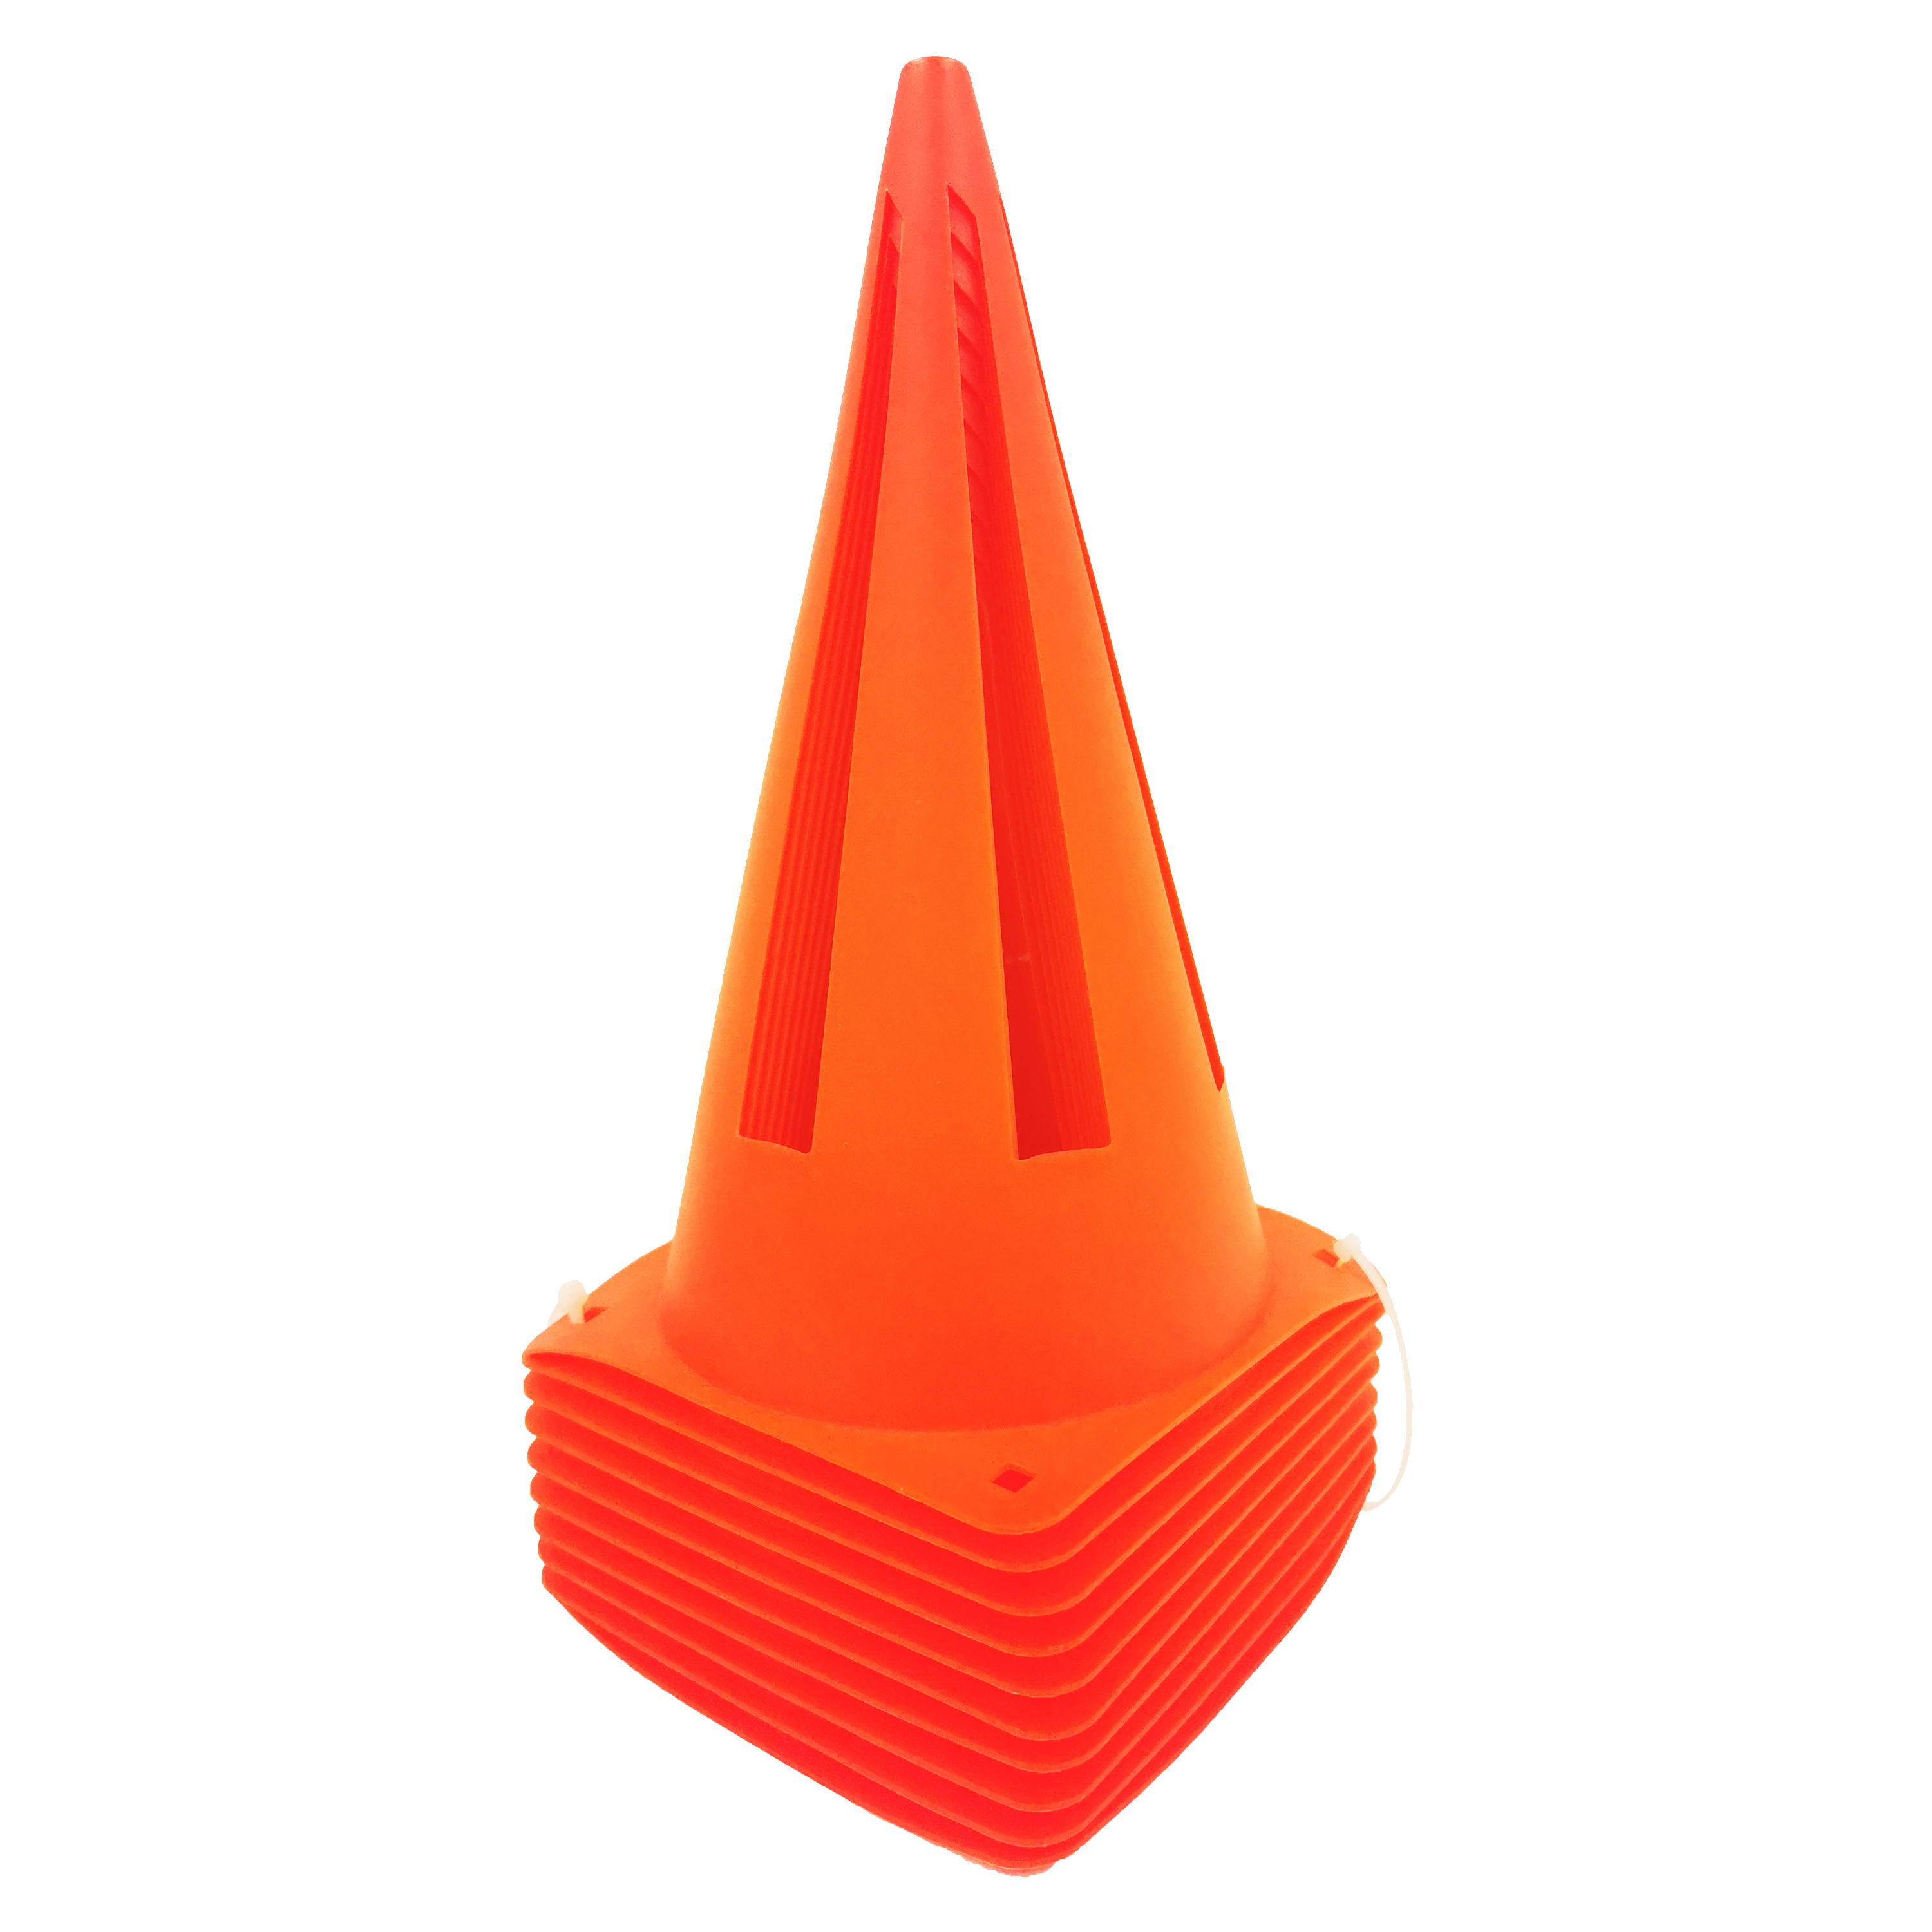 Seedopia Sport Sporting Goods Orange Collapsible sport Cone Markers for Indoor/Outdoor Agility Training อุปกรณ์กีฬา สีเหลือง 9